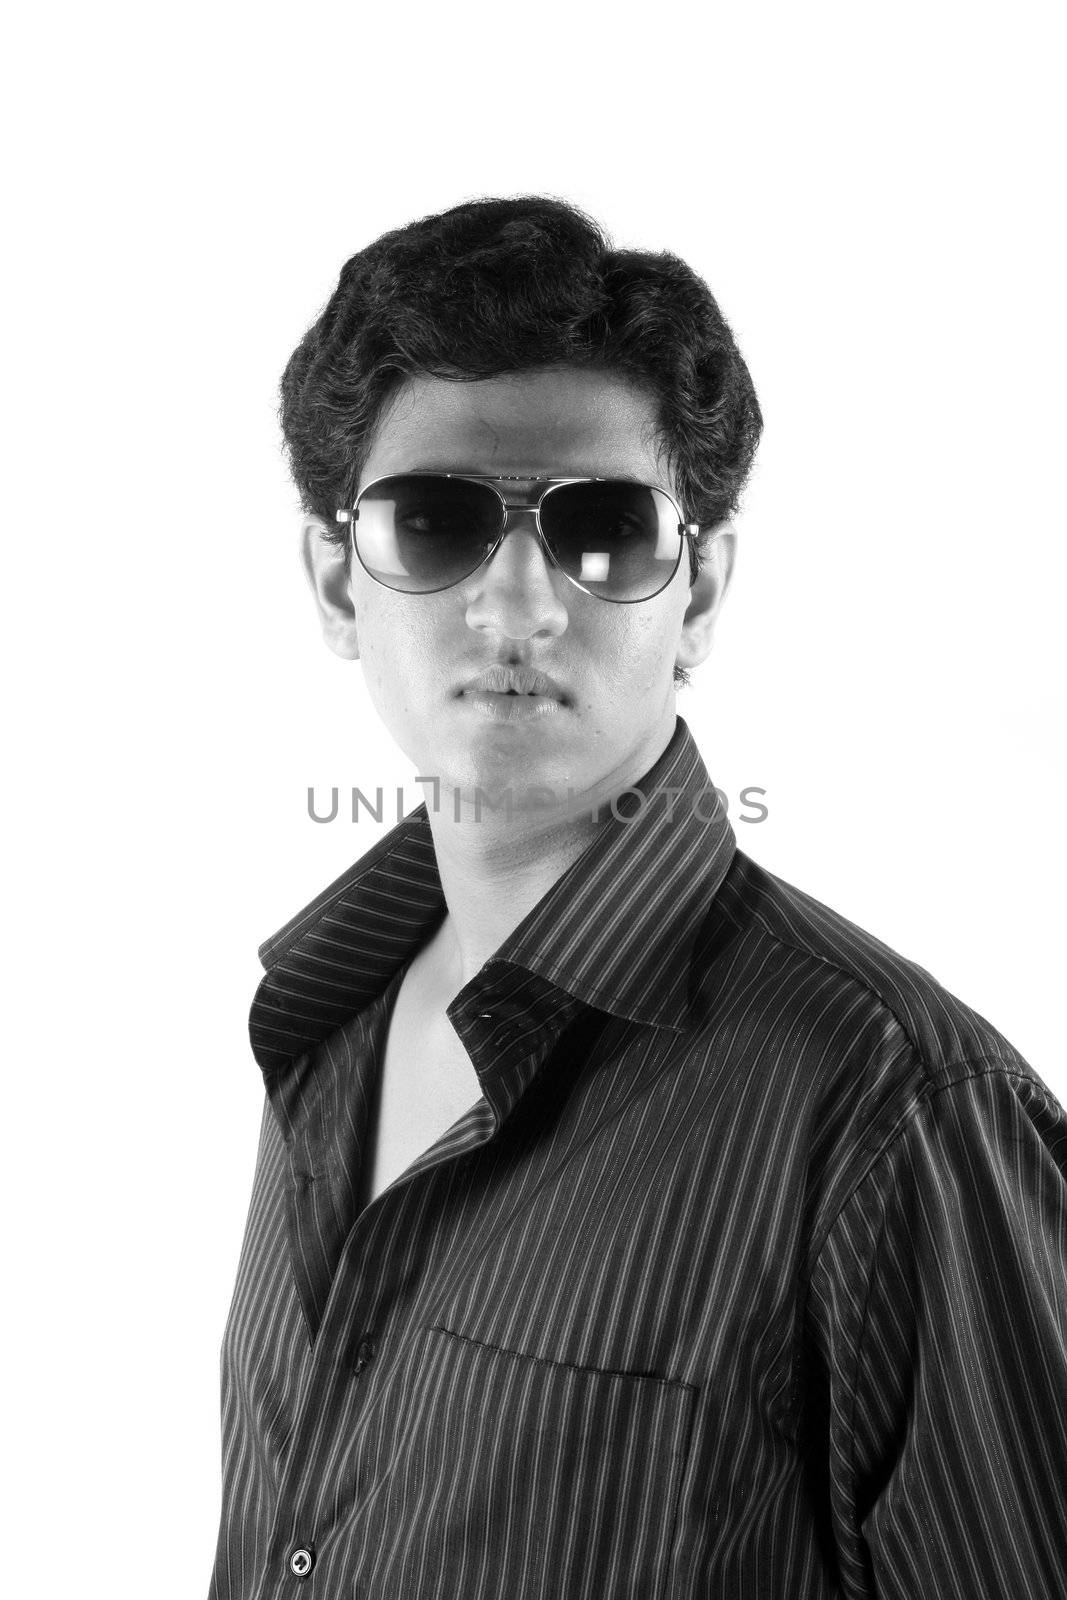 A black & white portrait of a young n' handsome Indian guy, on white studio background.